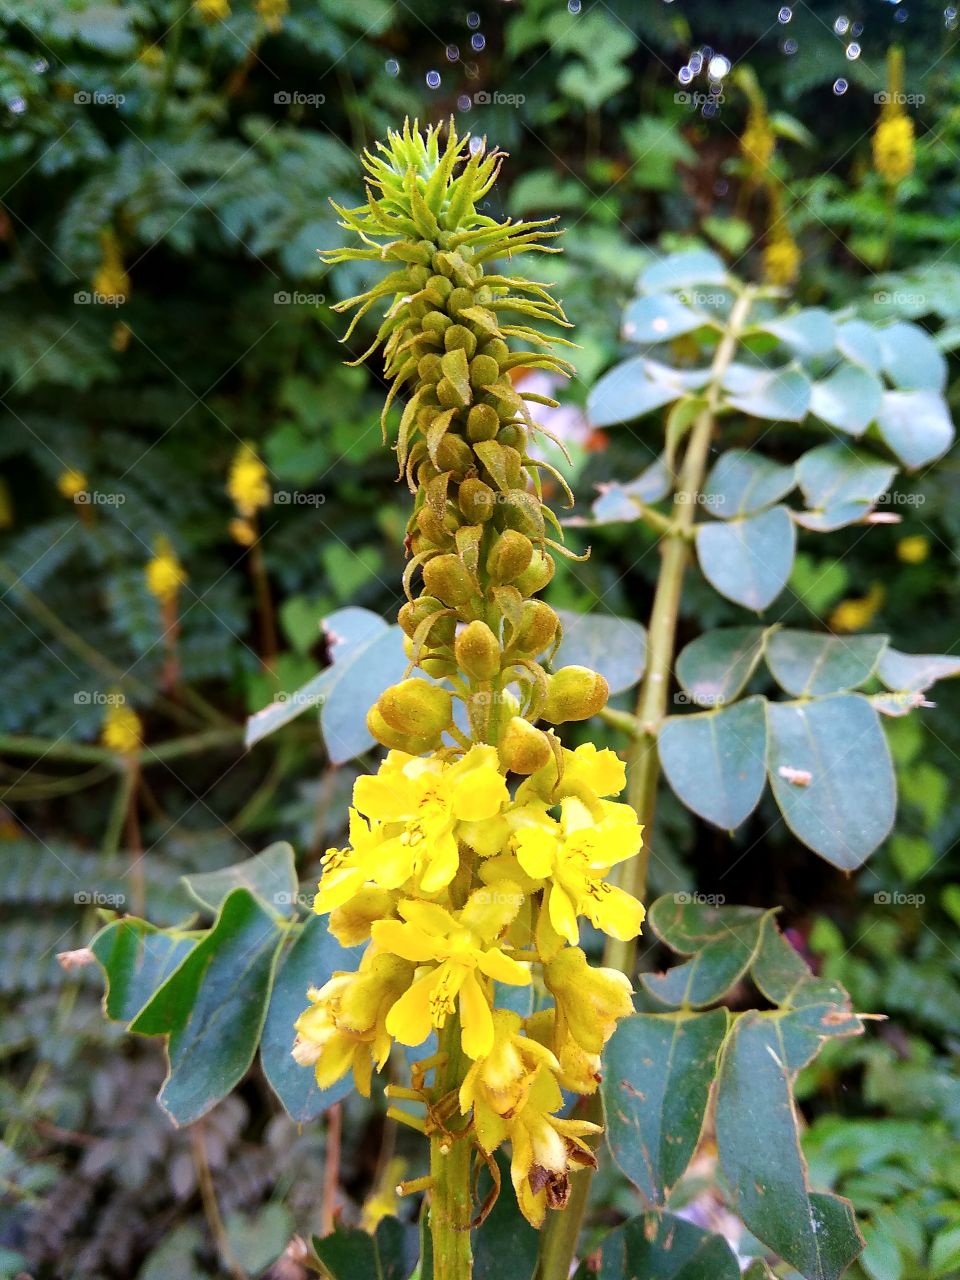 Yellowish flower with green leaves